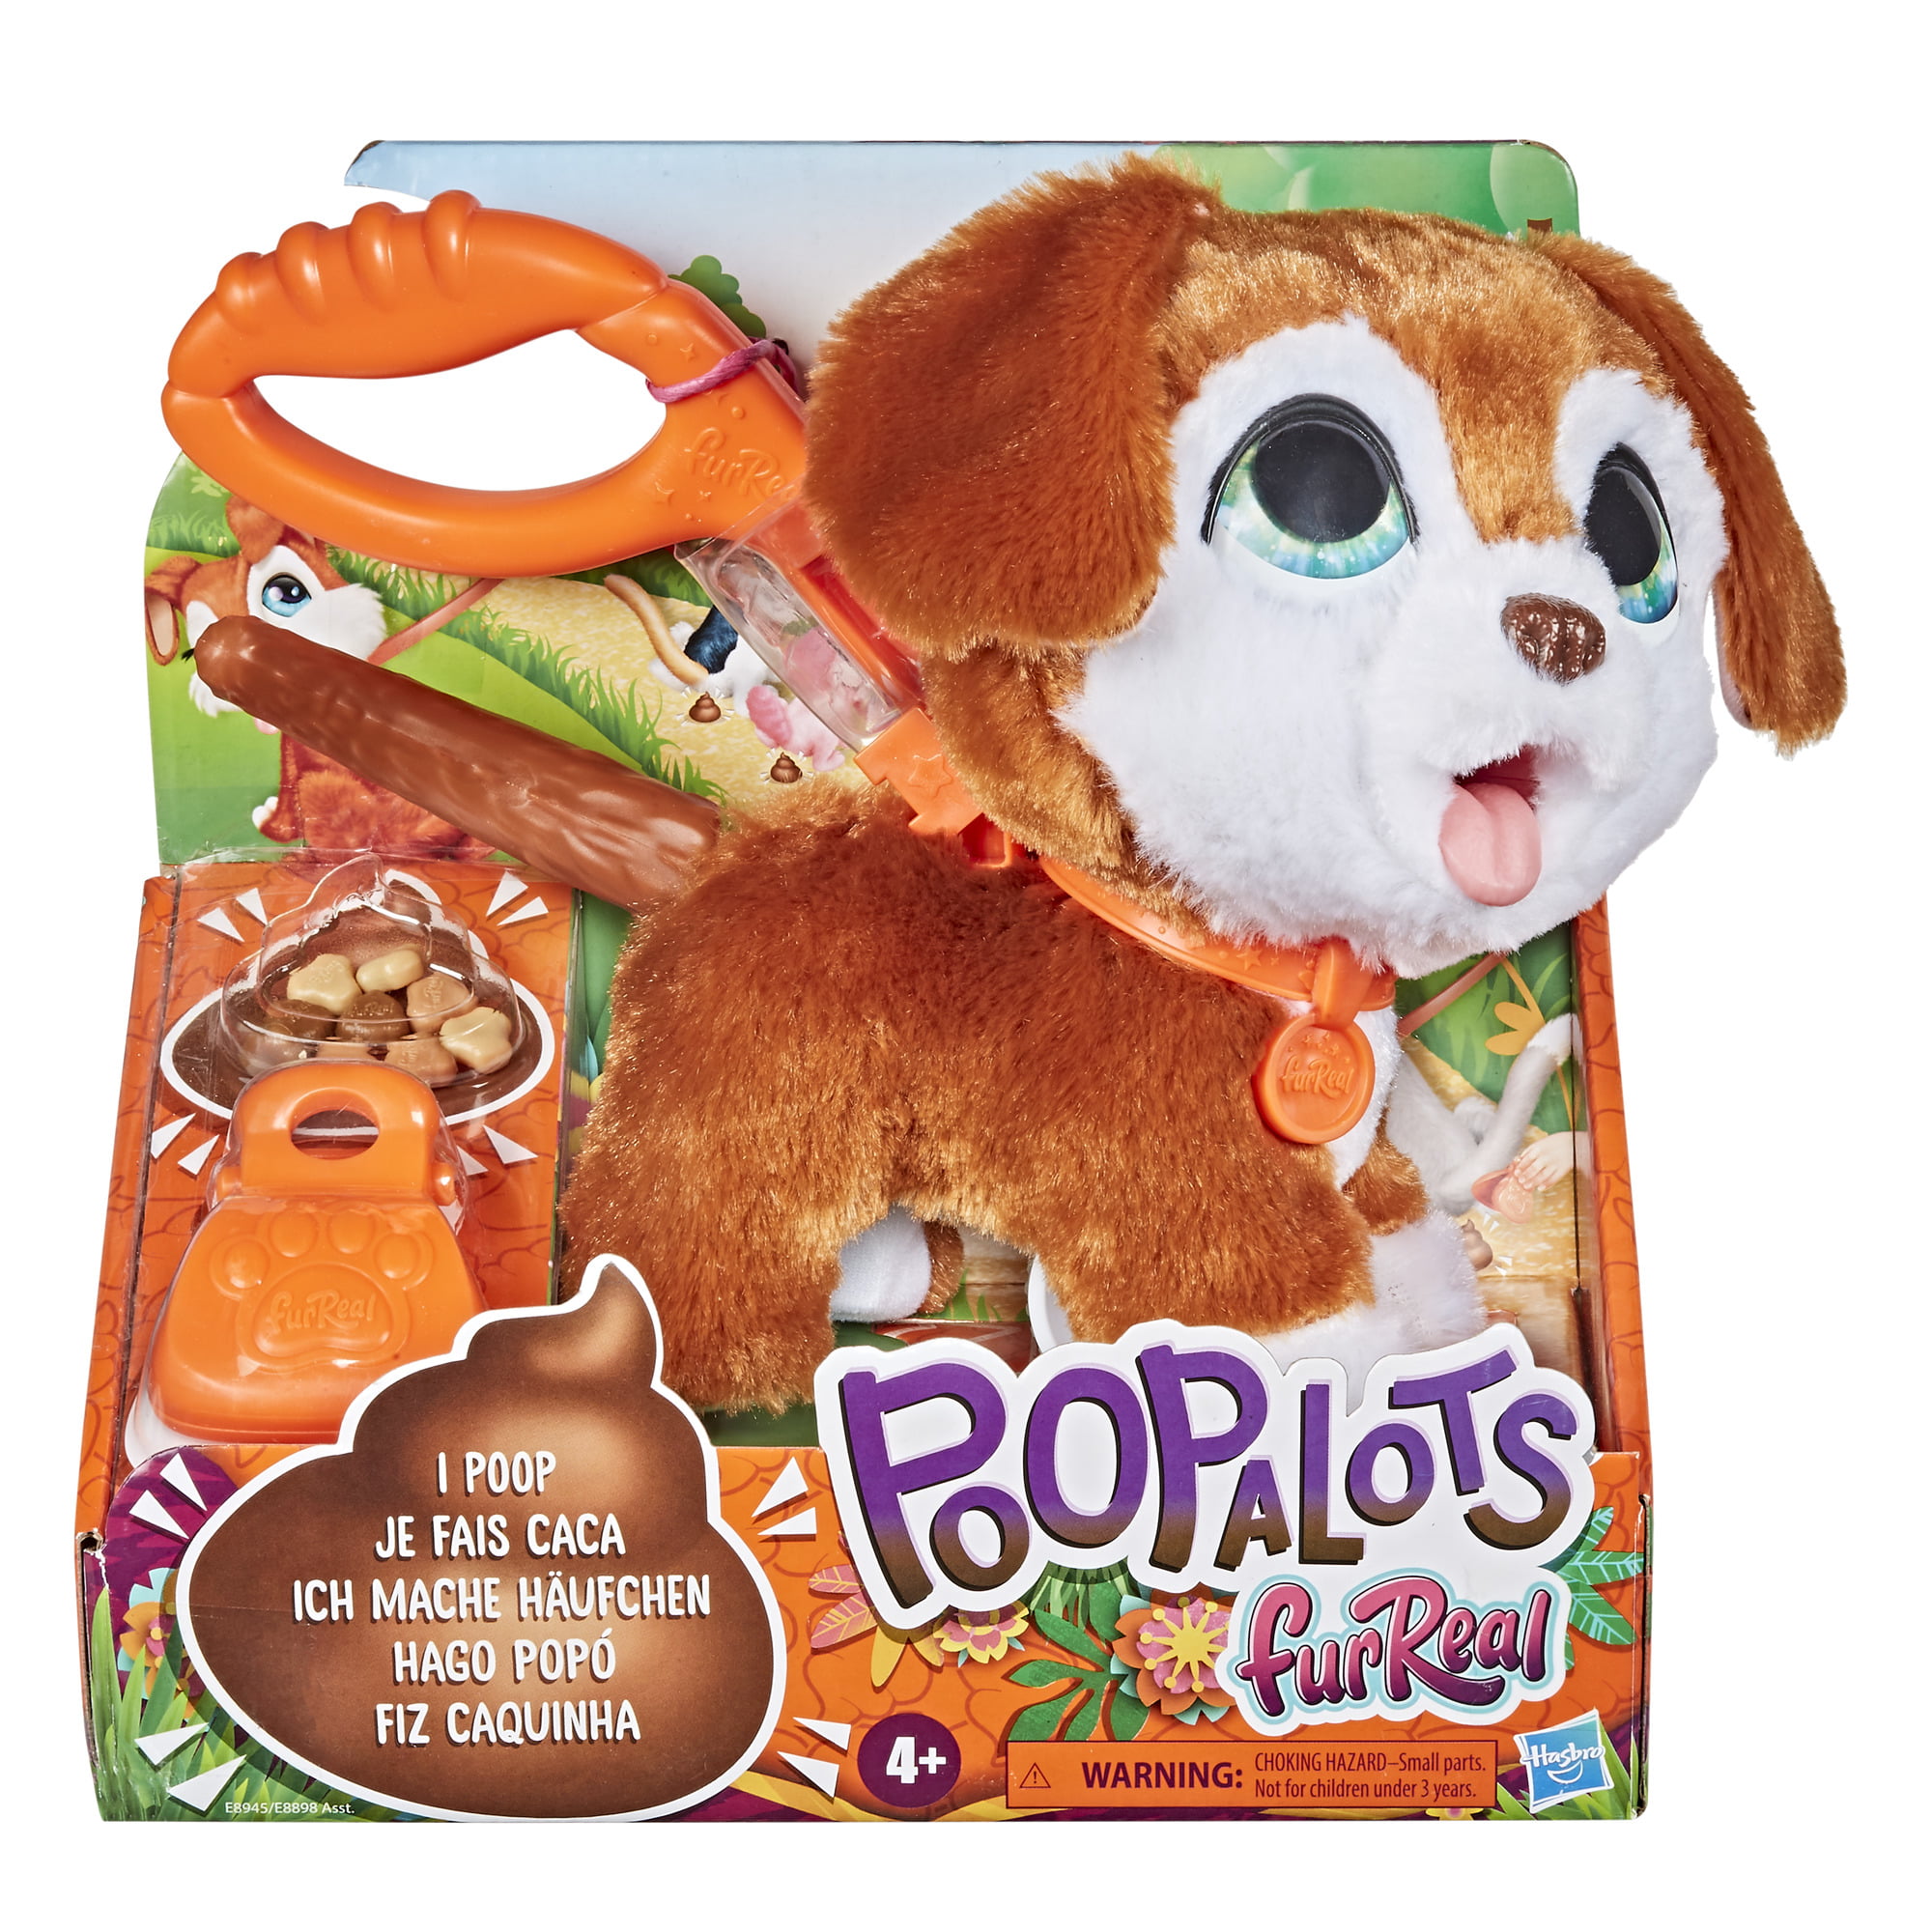 toy dog that poops and walks